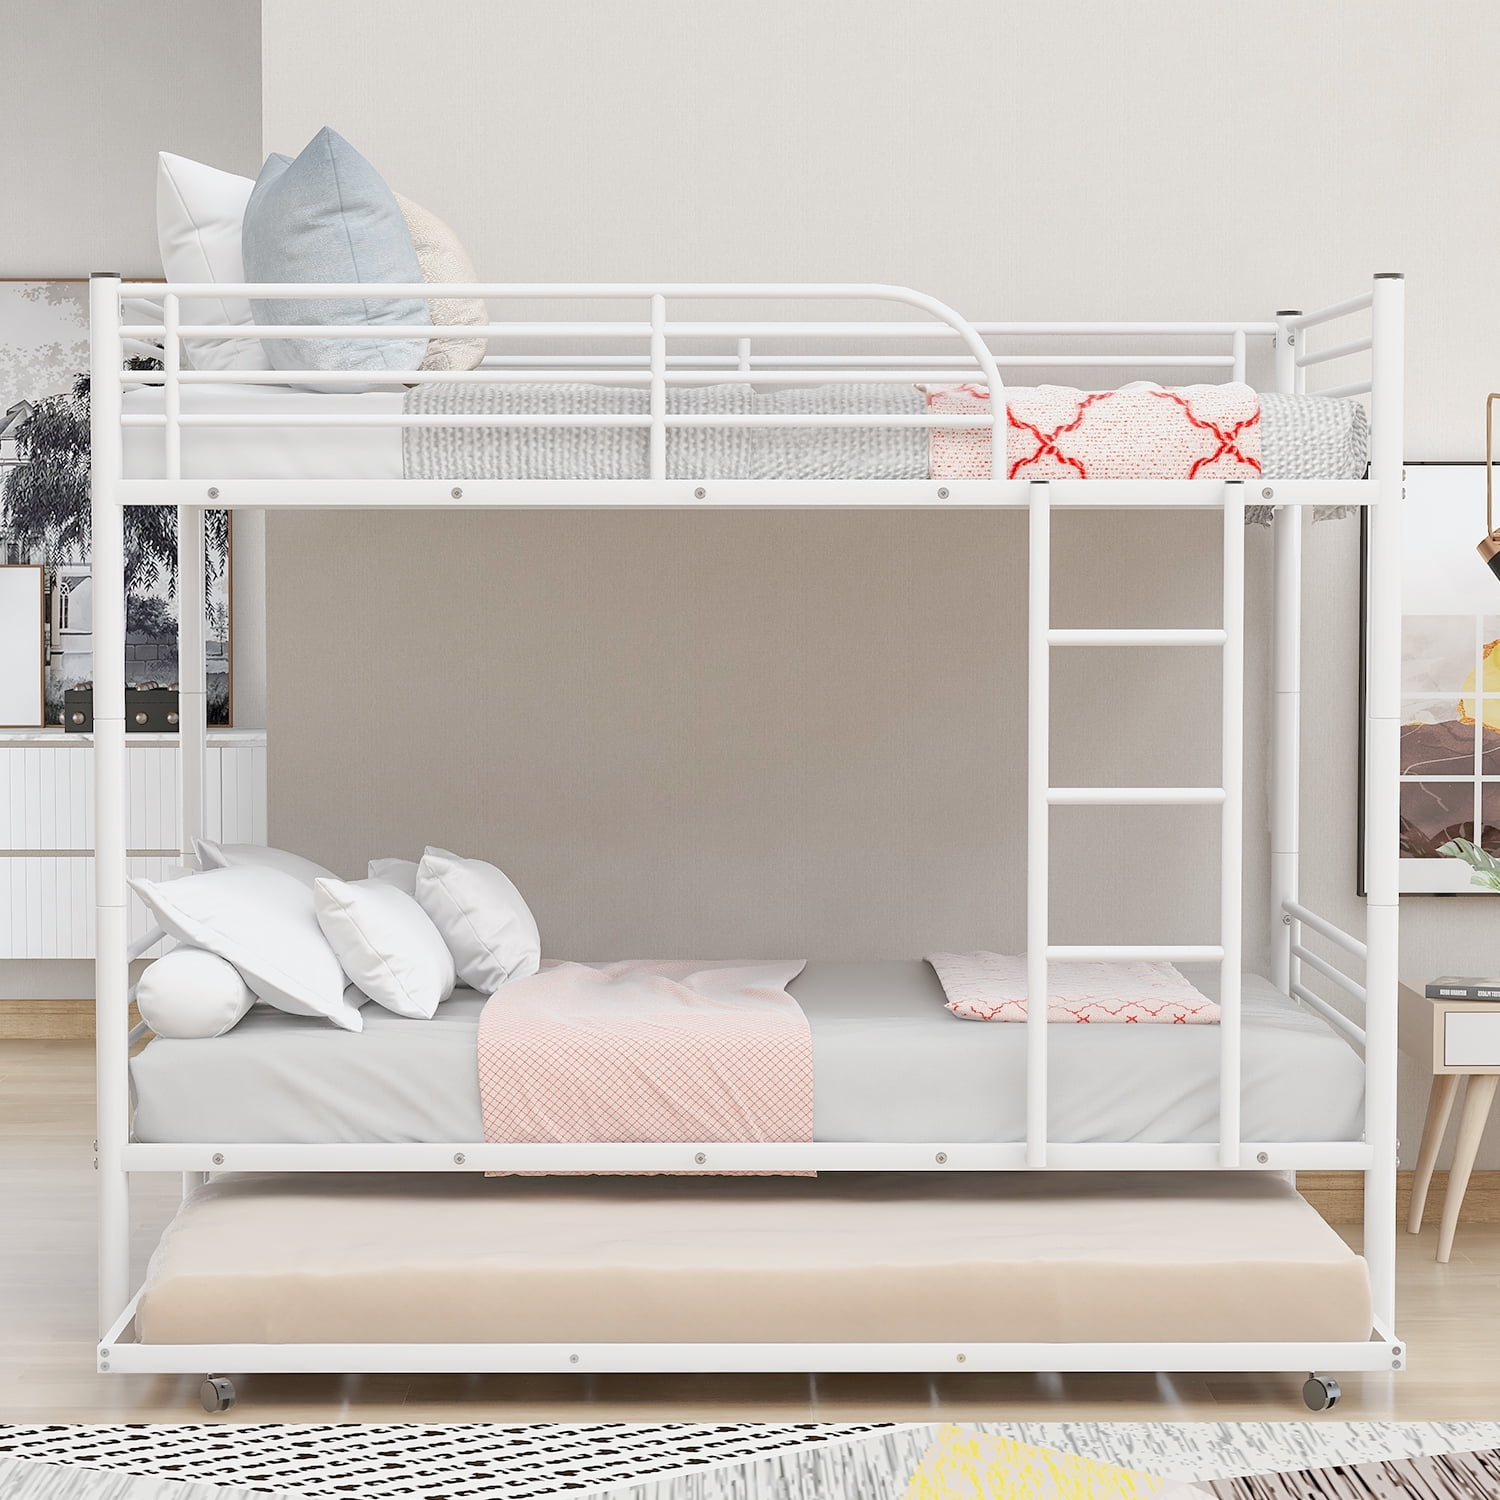 Metal Bunk Bed Twin Over Twin Bunk Beds Kids Bed with storage or trundle 